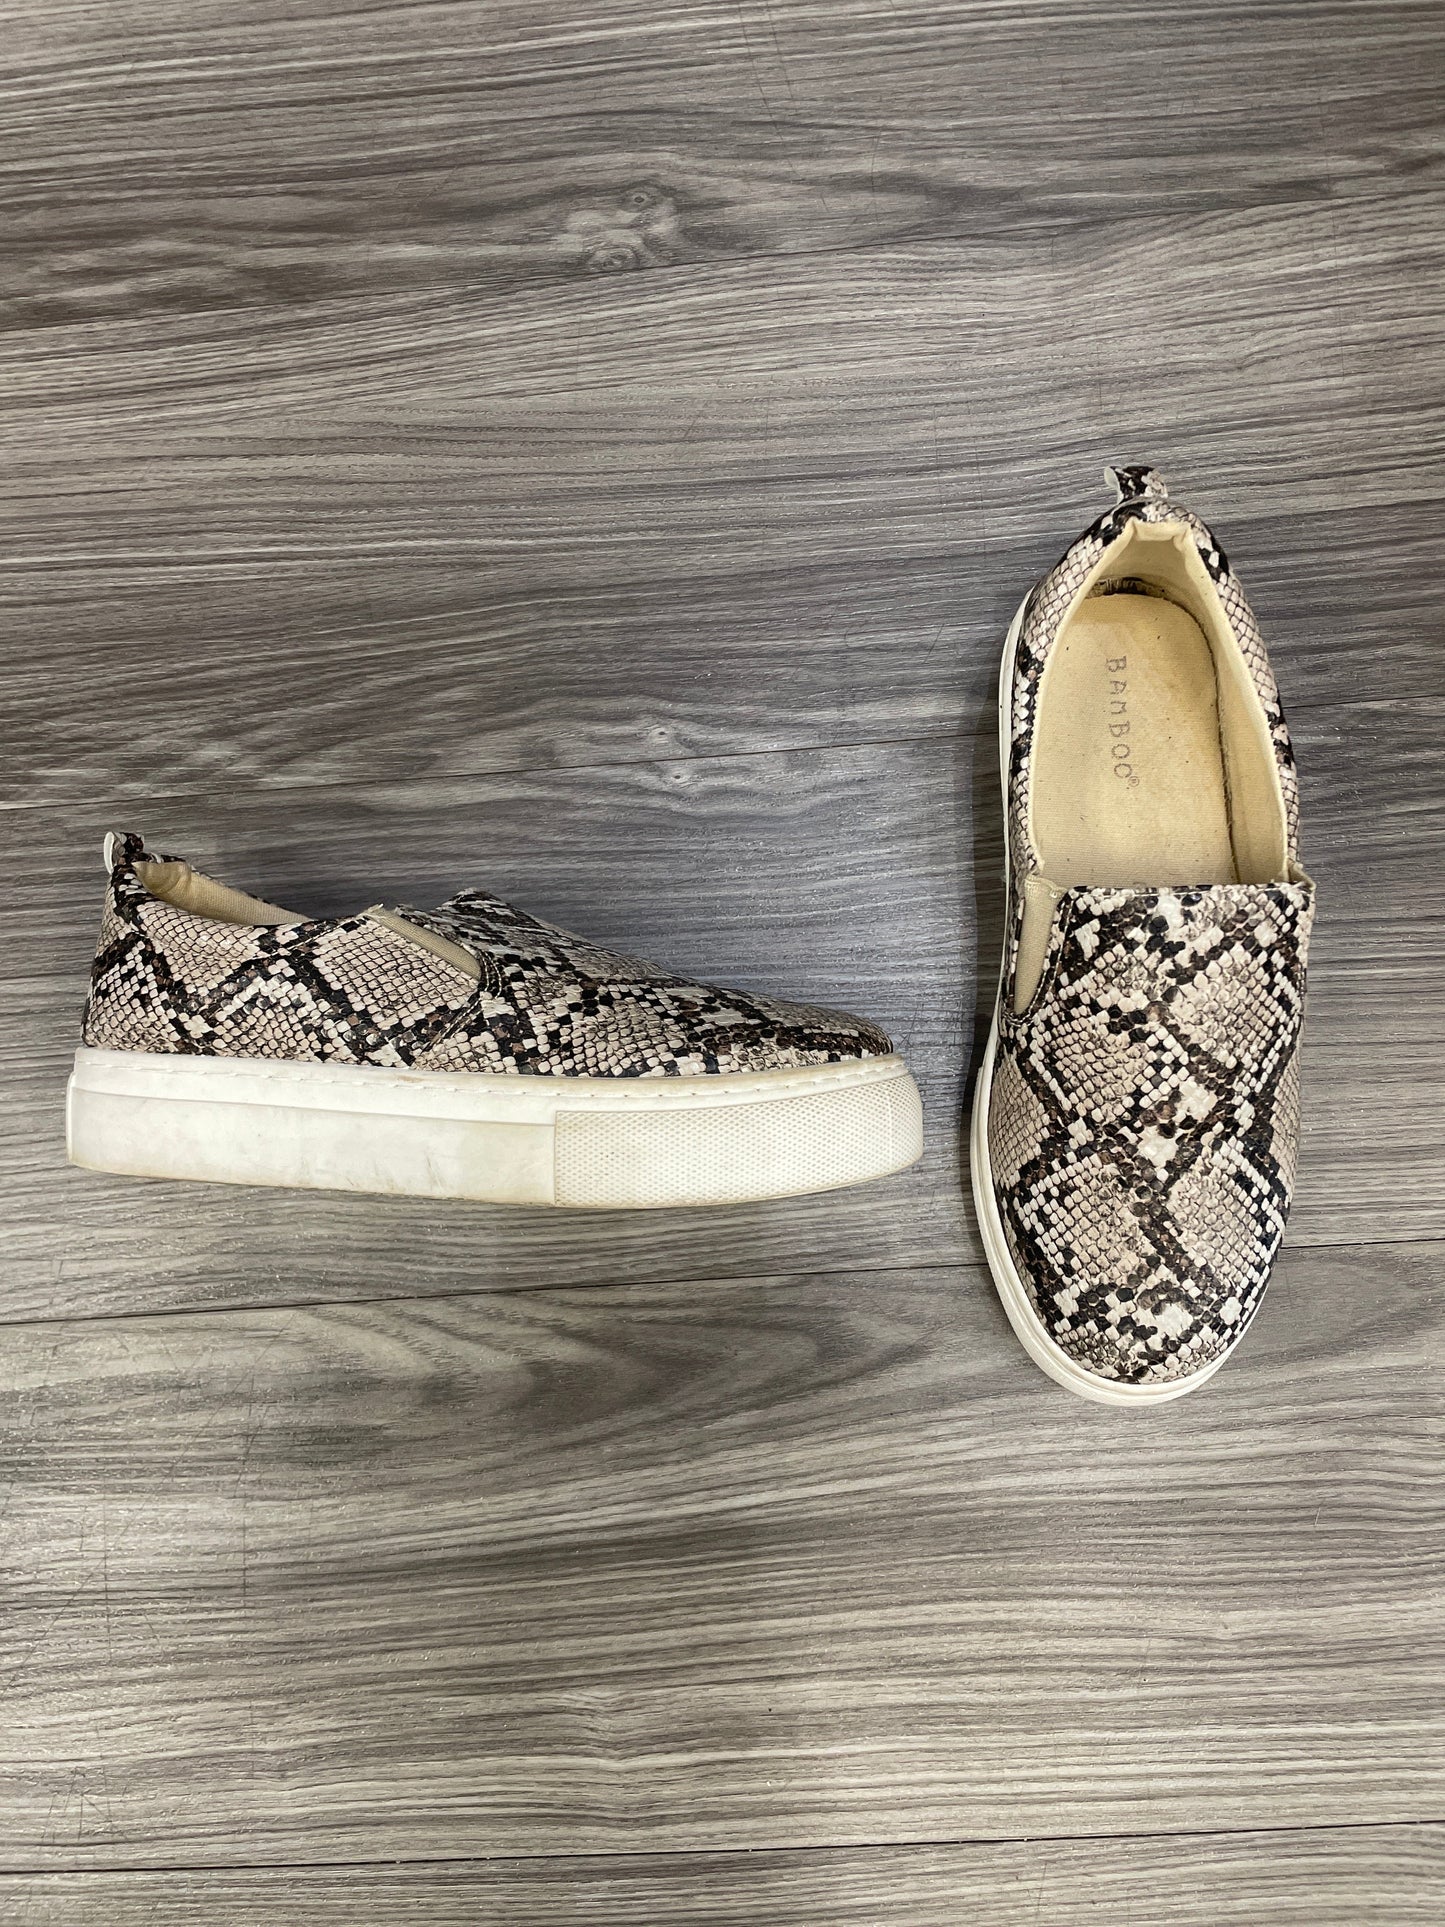 Animal Print Shoes Sneakers Platform Bamboo, Size 7.5